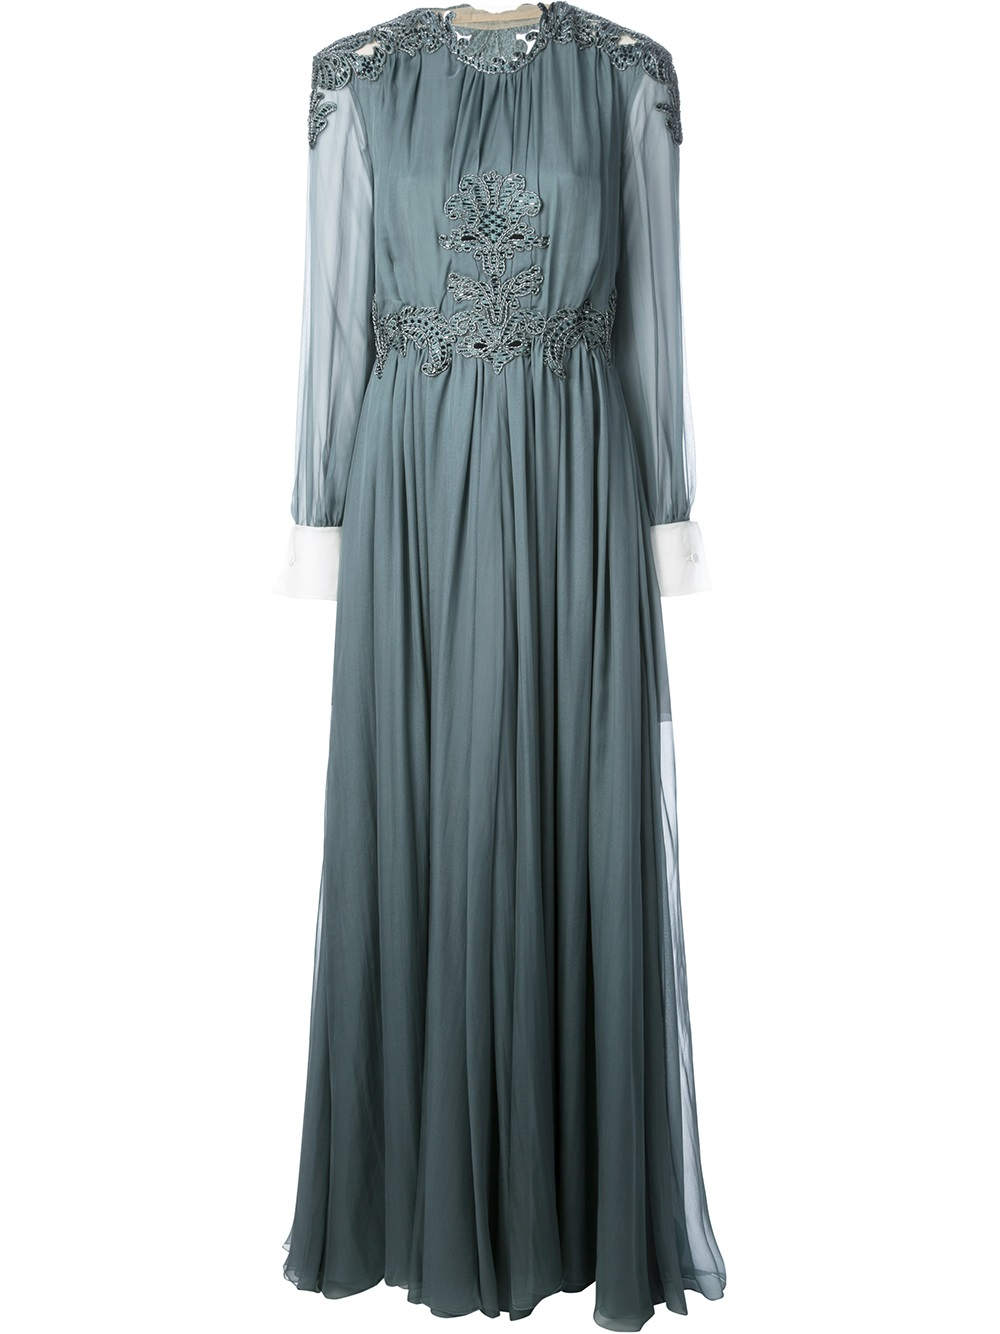 Valentino Embellished Maxi Dress in Grey (Gray) - Lyst